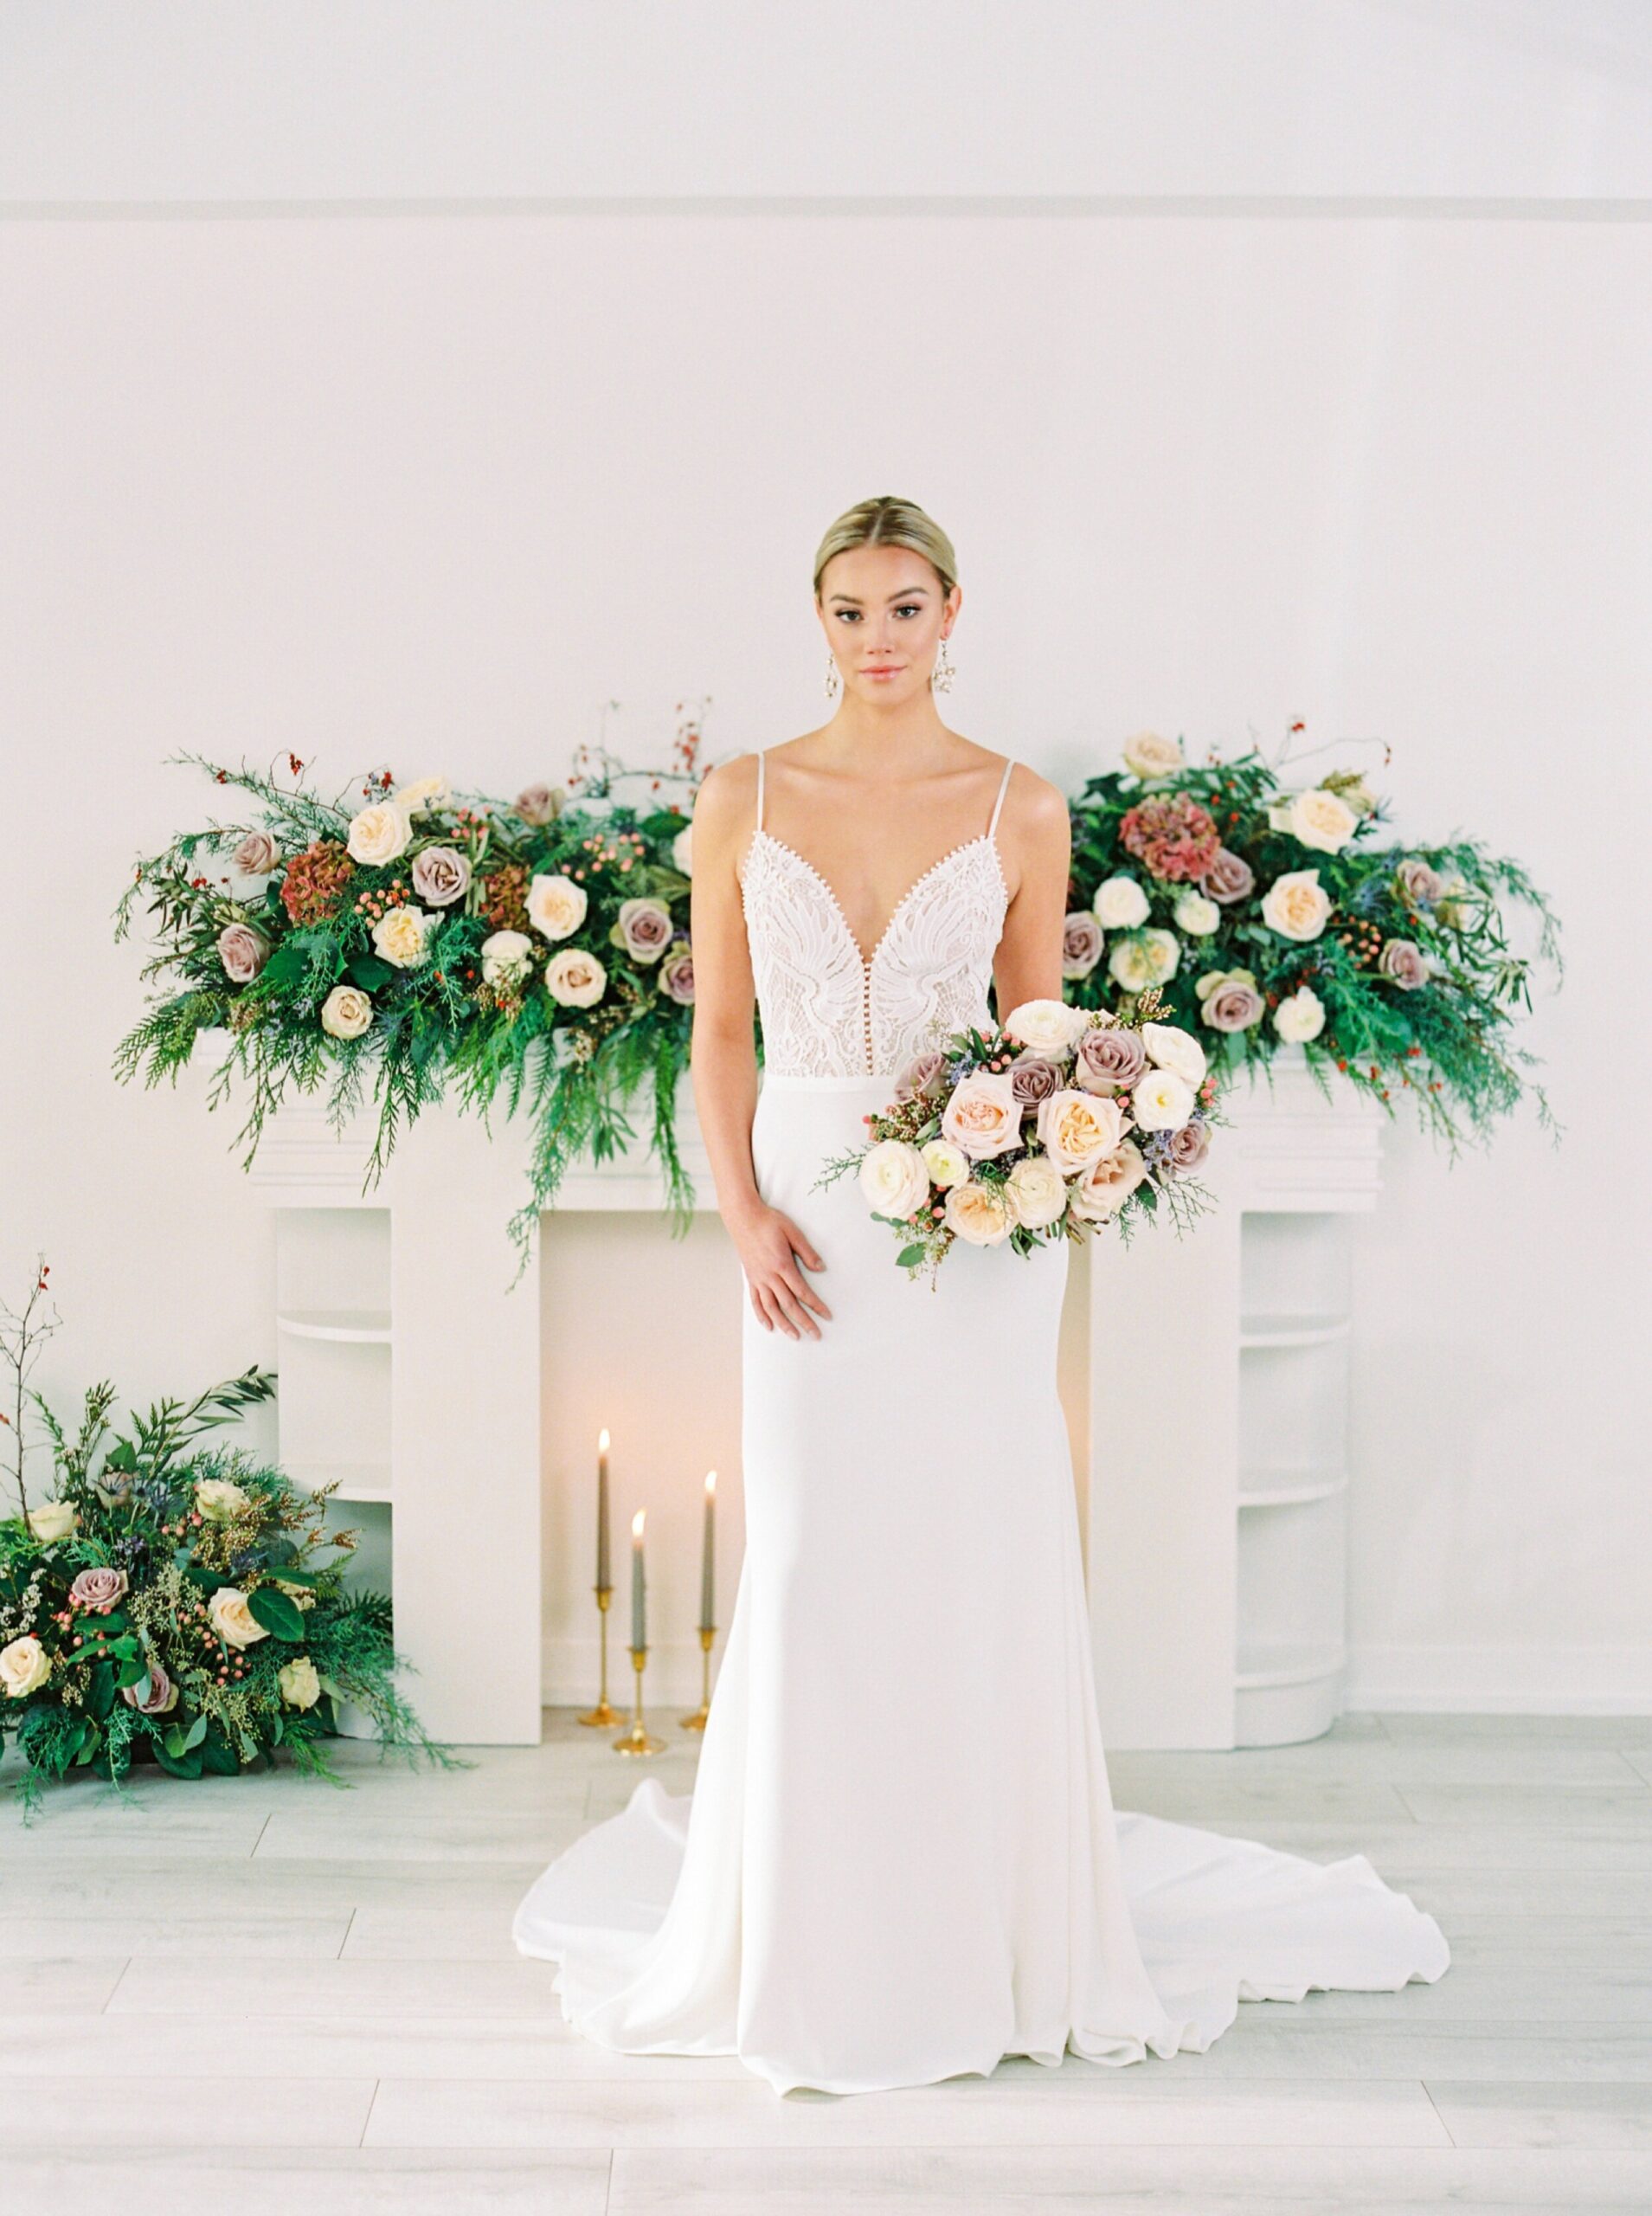  fitted wedding dress inspiration | fine art flower installation with greenery above fireplace | modern bridal bouquet with dusty pinks and roses 